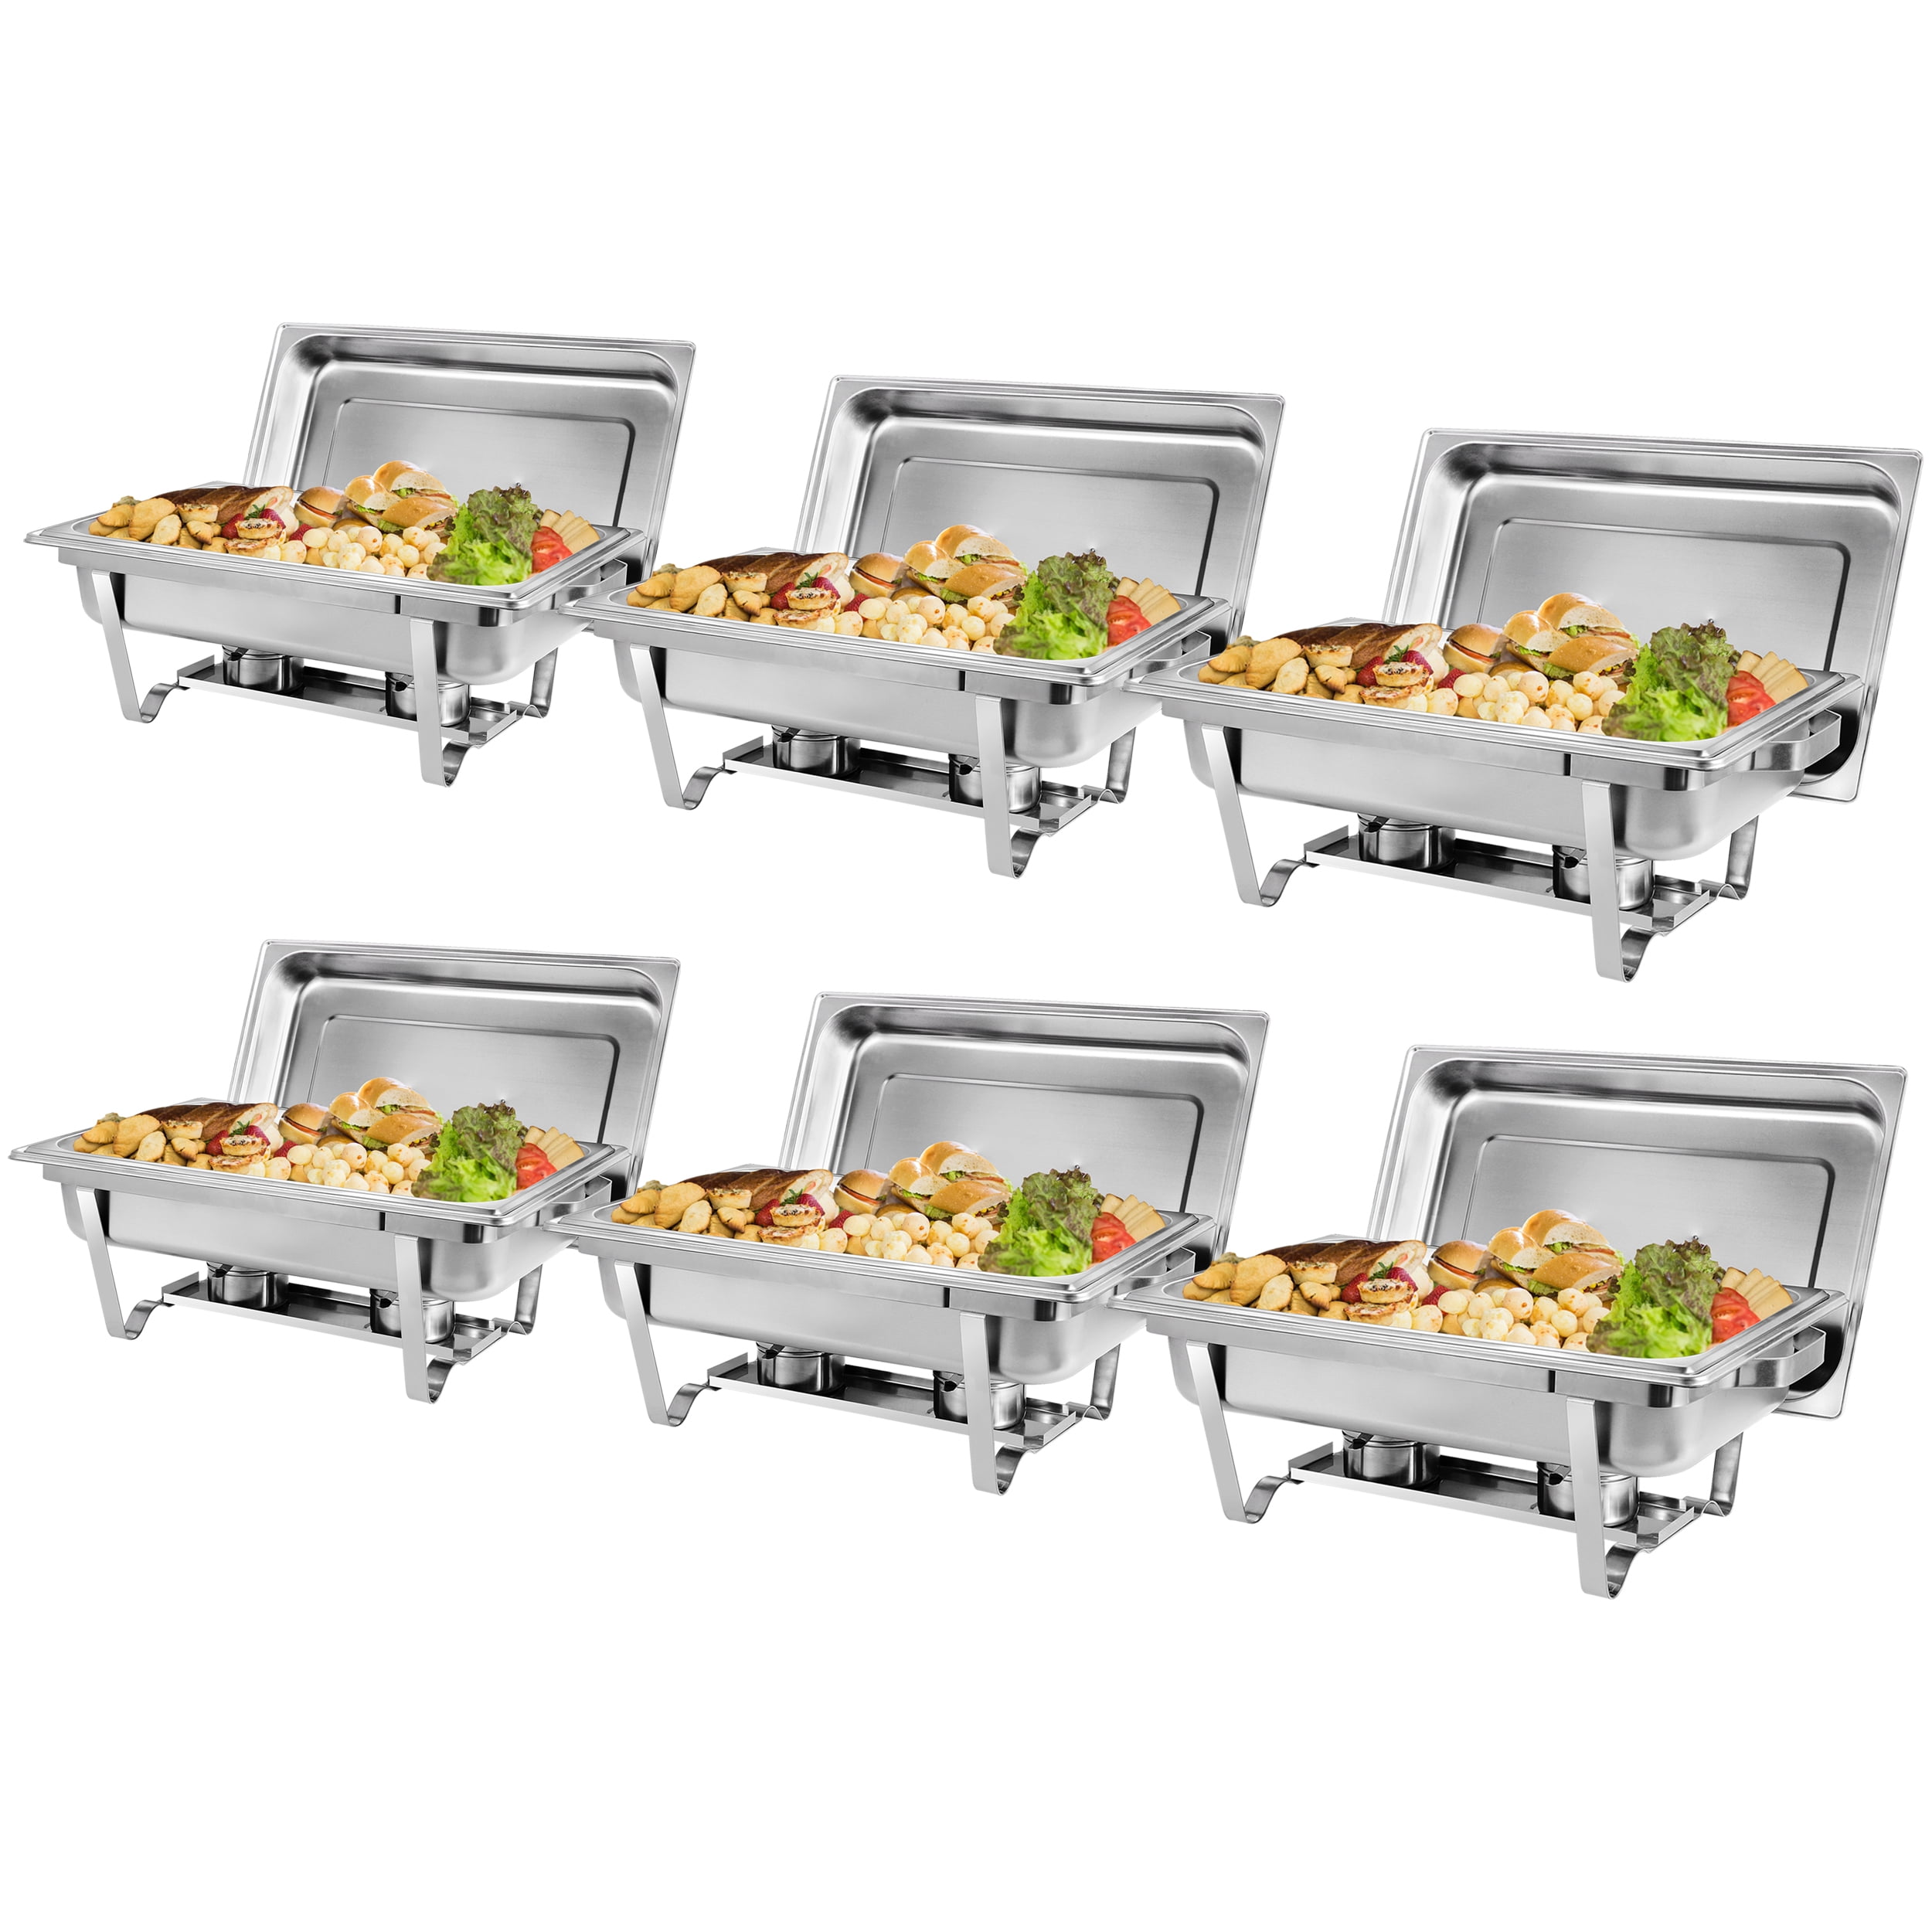 Stainless Steel Chafing Dish Full Size Chafer Dish Set 6 Pack of 8 Stainless Steel Chafing Dish Set